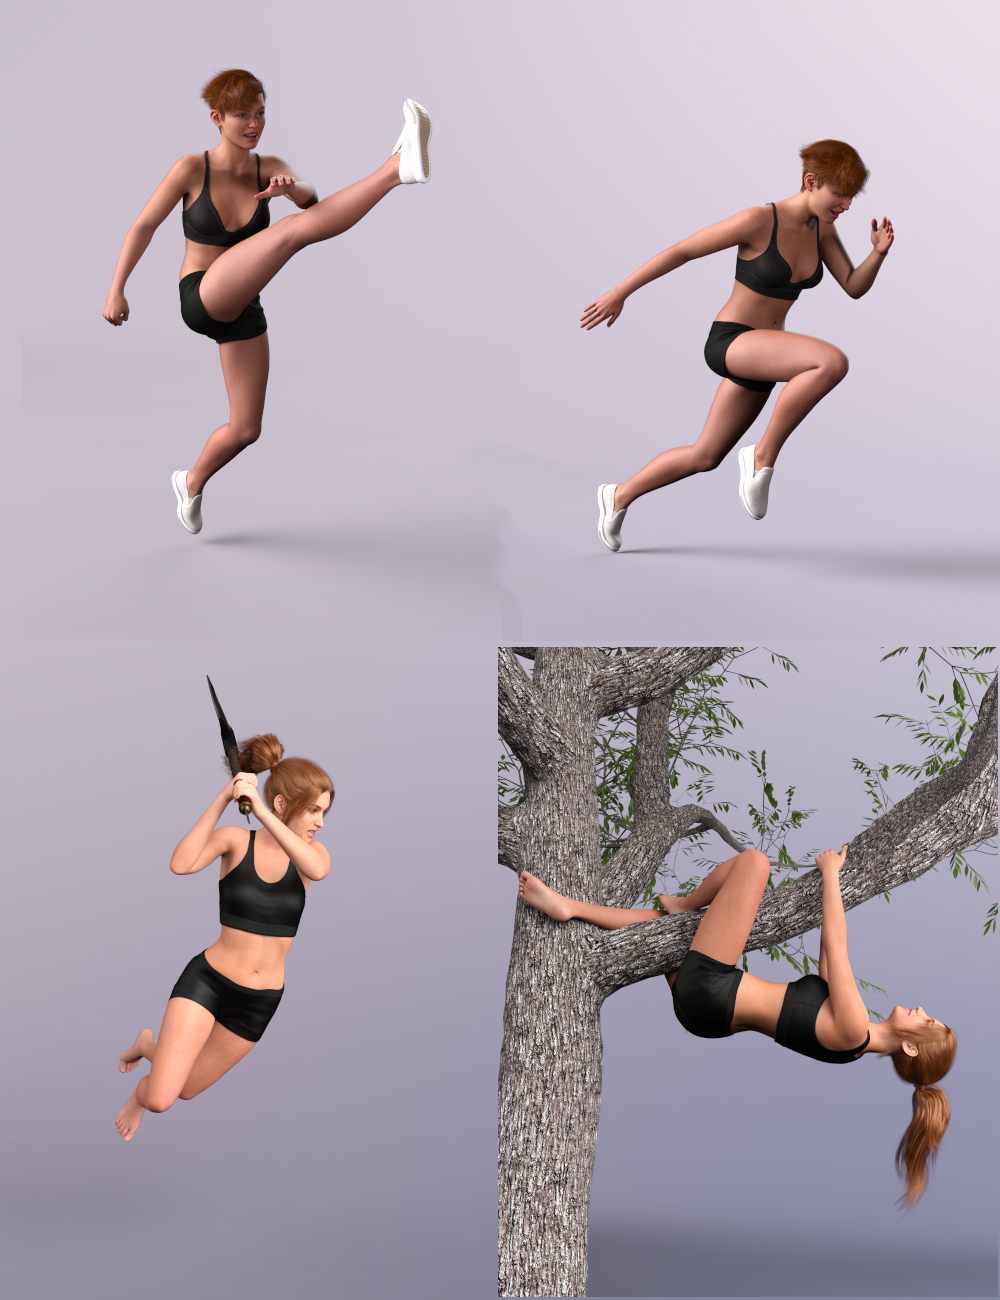 Let's Get Moving Poses for Genesis 9, 8.1, and 8 by: Scuffles3d, 3D Models by Daz 3D